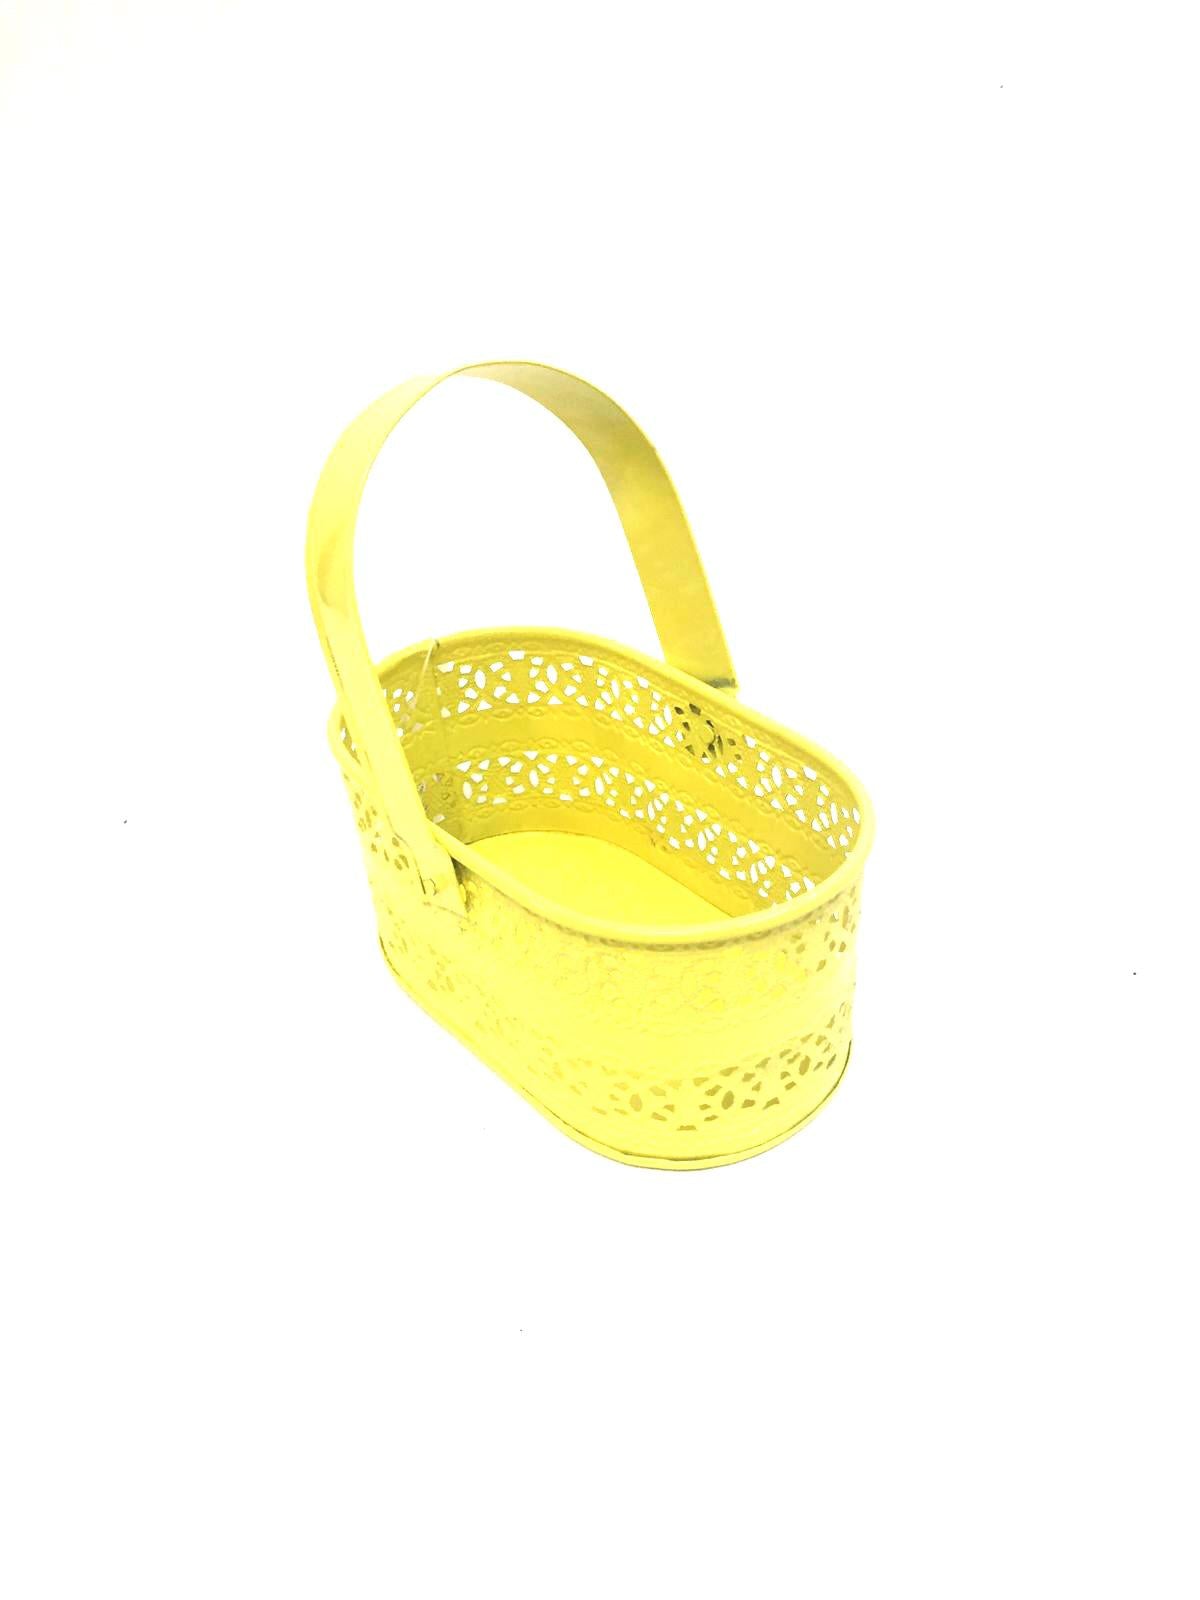 Basket Style Storage Metal Handcrafted With Easy Carry Handle By Tamrapatra